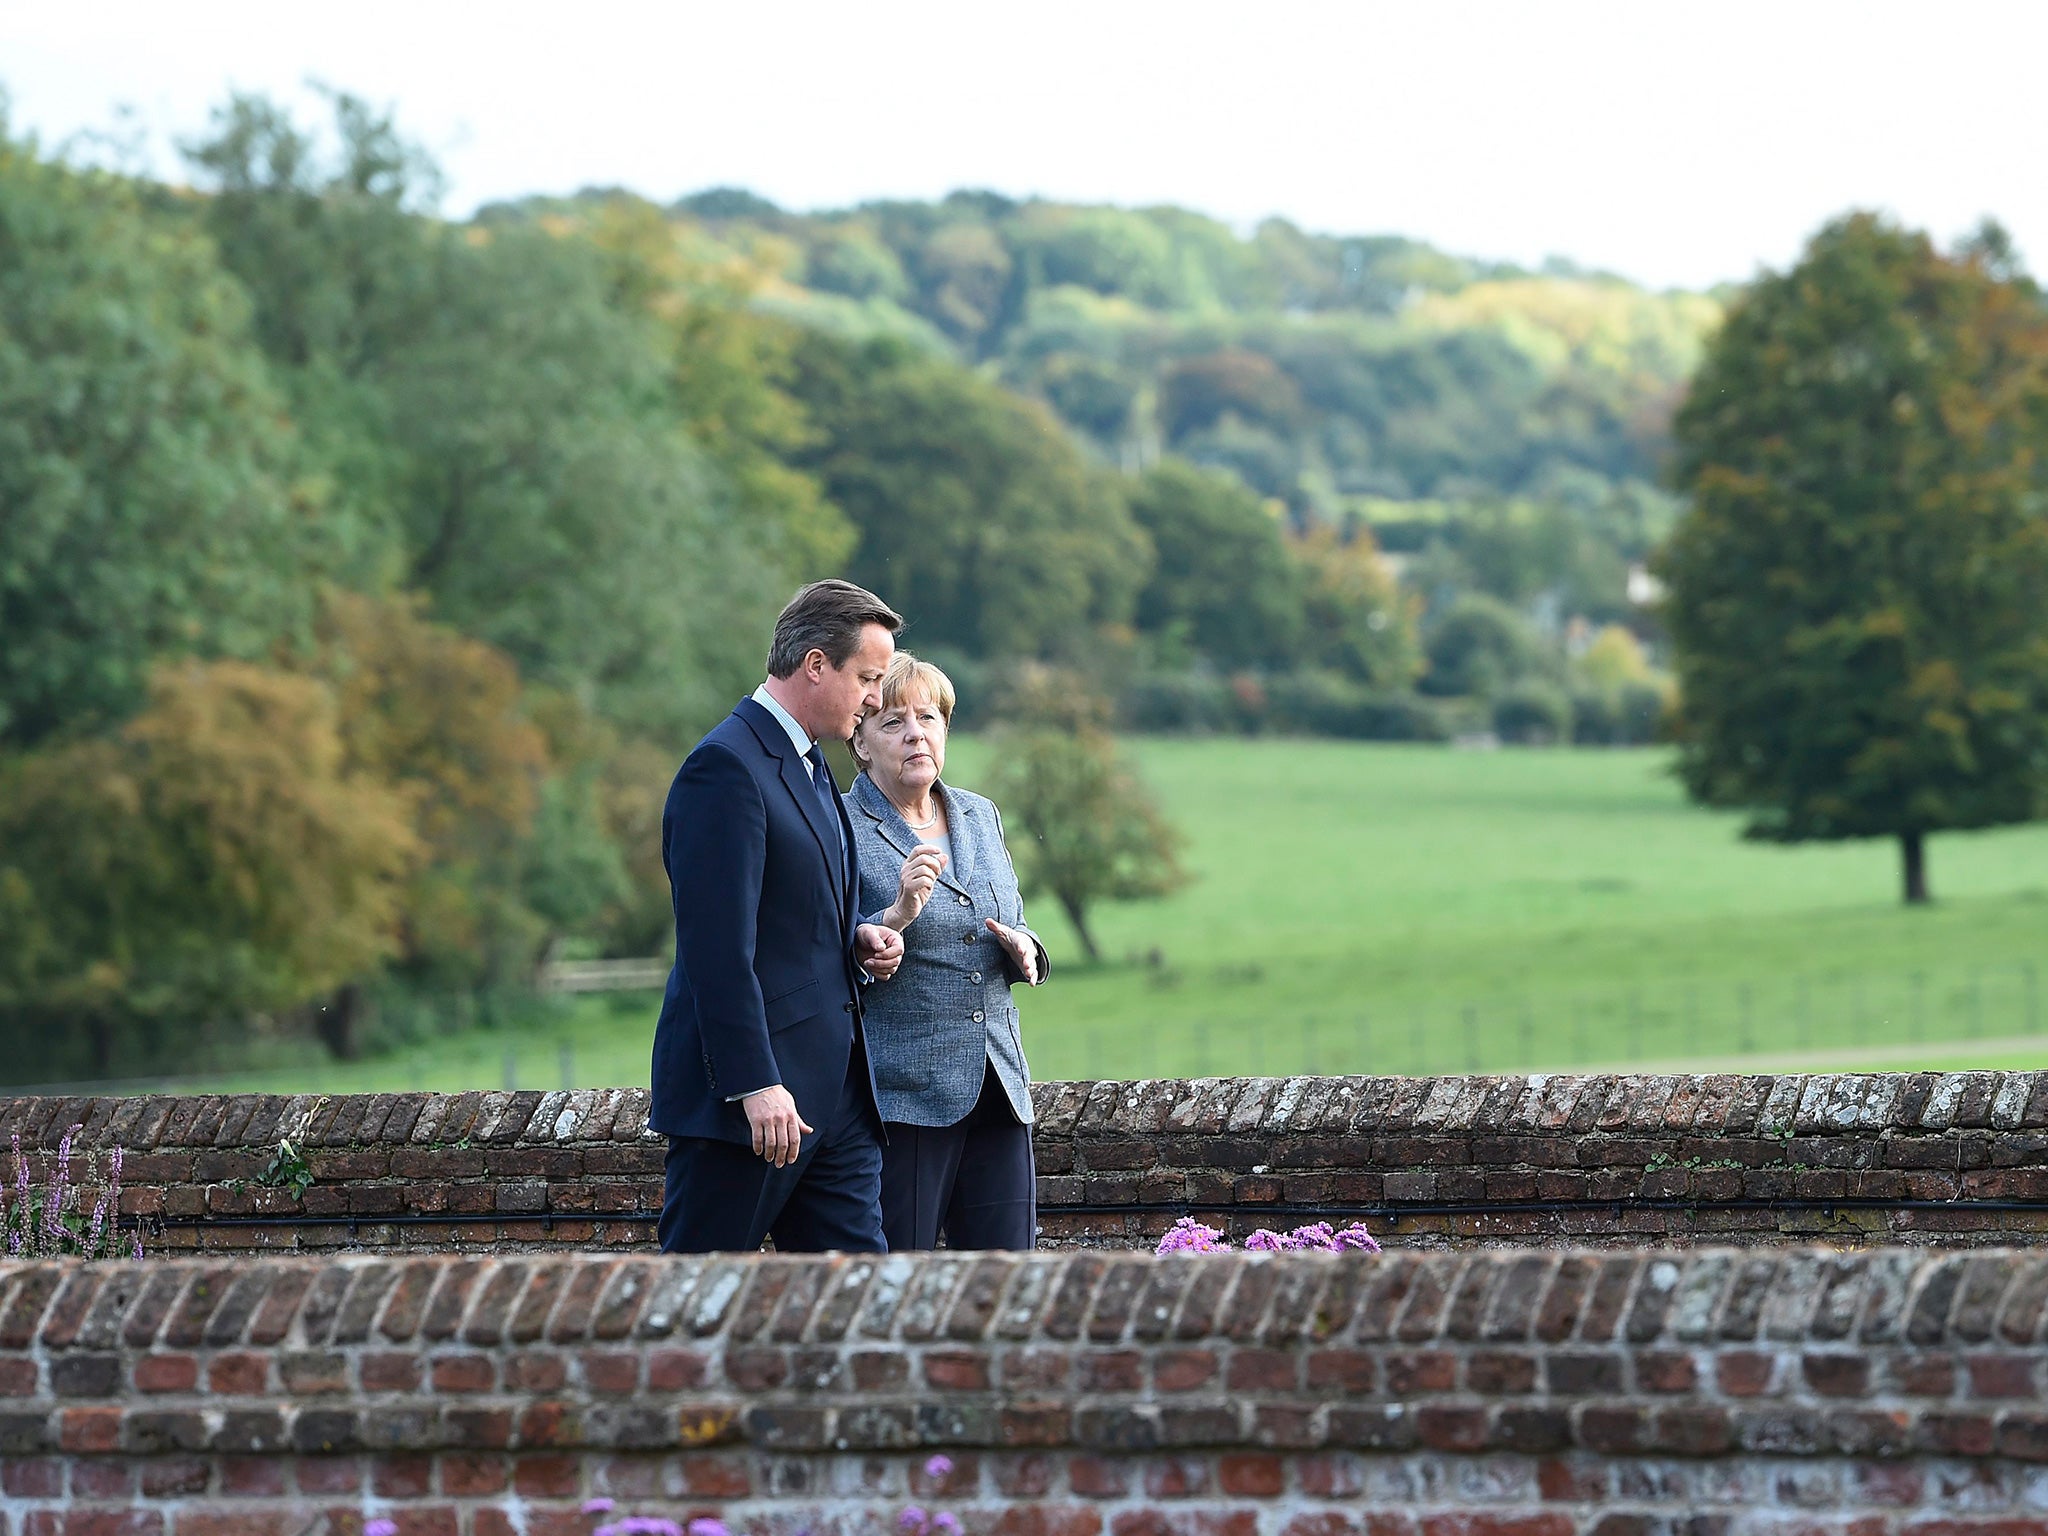 British Prime Minister David Cameron (L) and German Chancellor Angela Merkel (R) chat in the Rose Garden at Chequers in Ellesborough